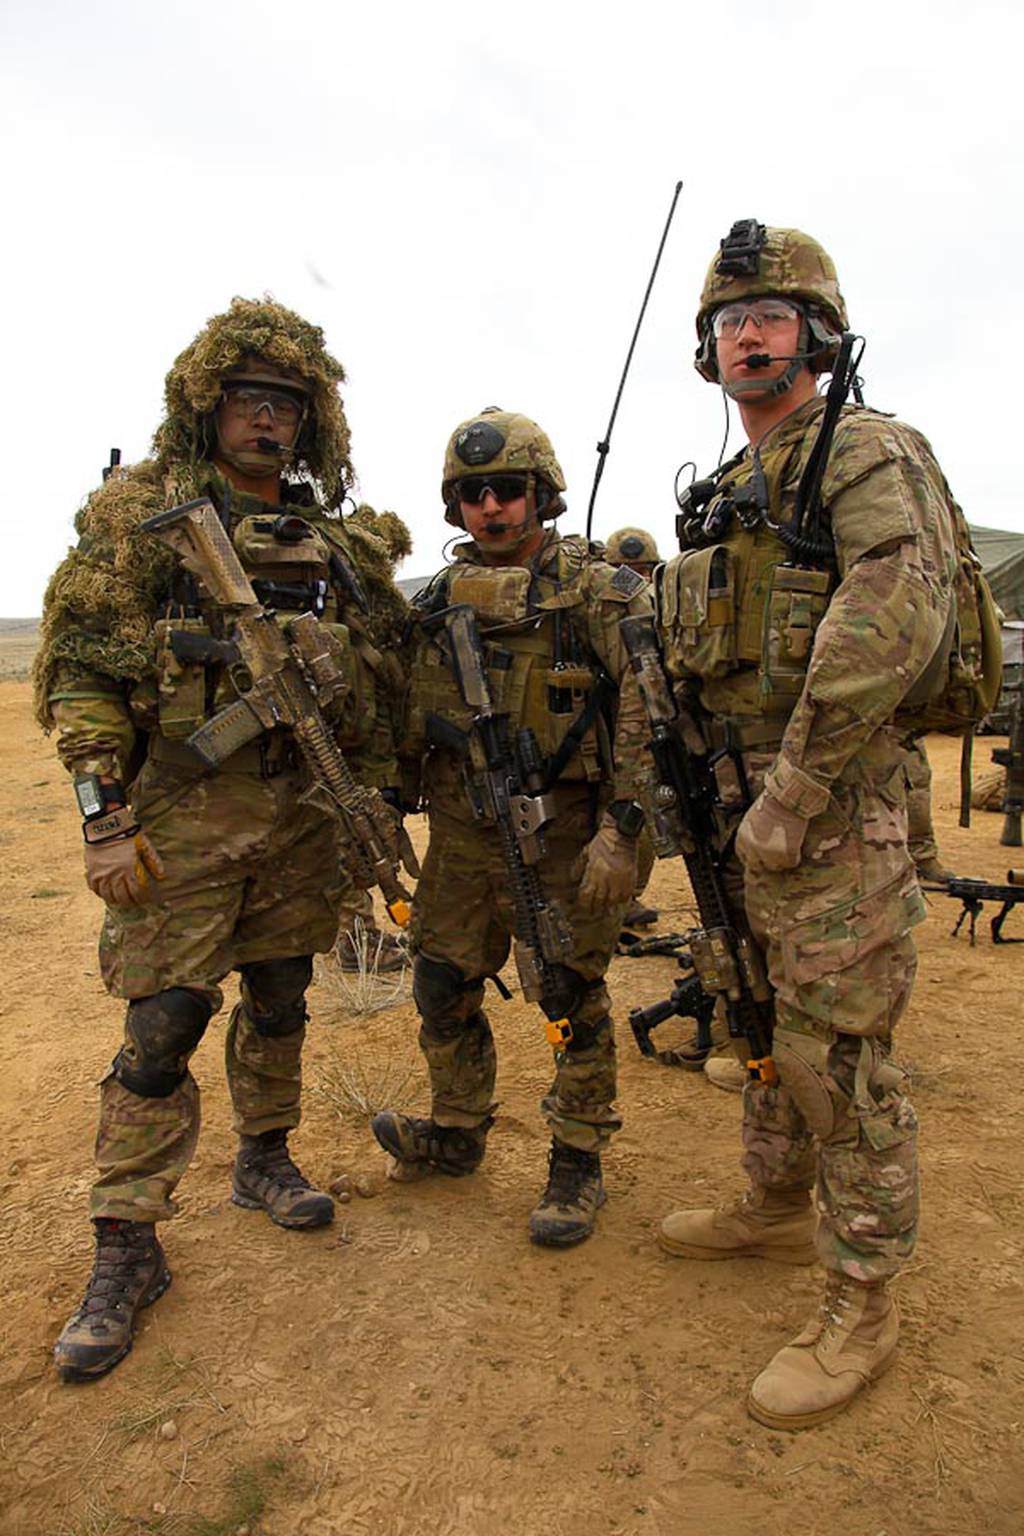 US Army Ranger Jobs: How to Join and What You Need to Know - News Military